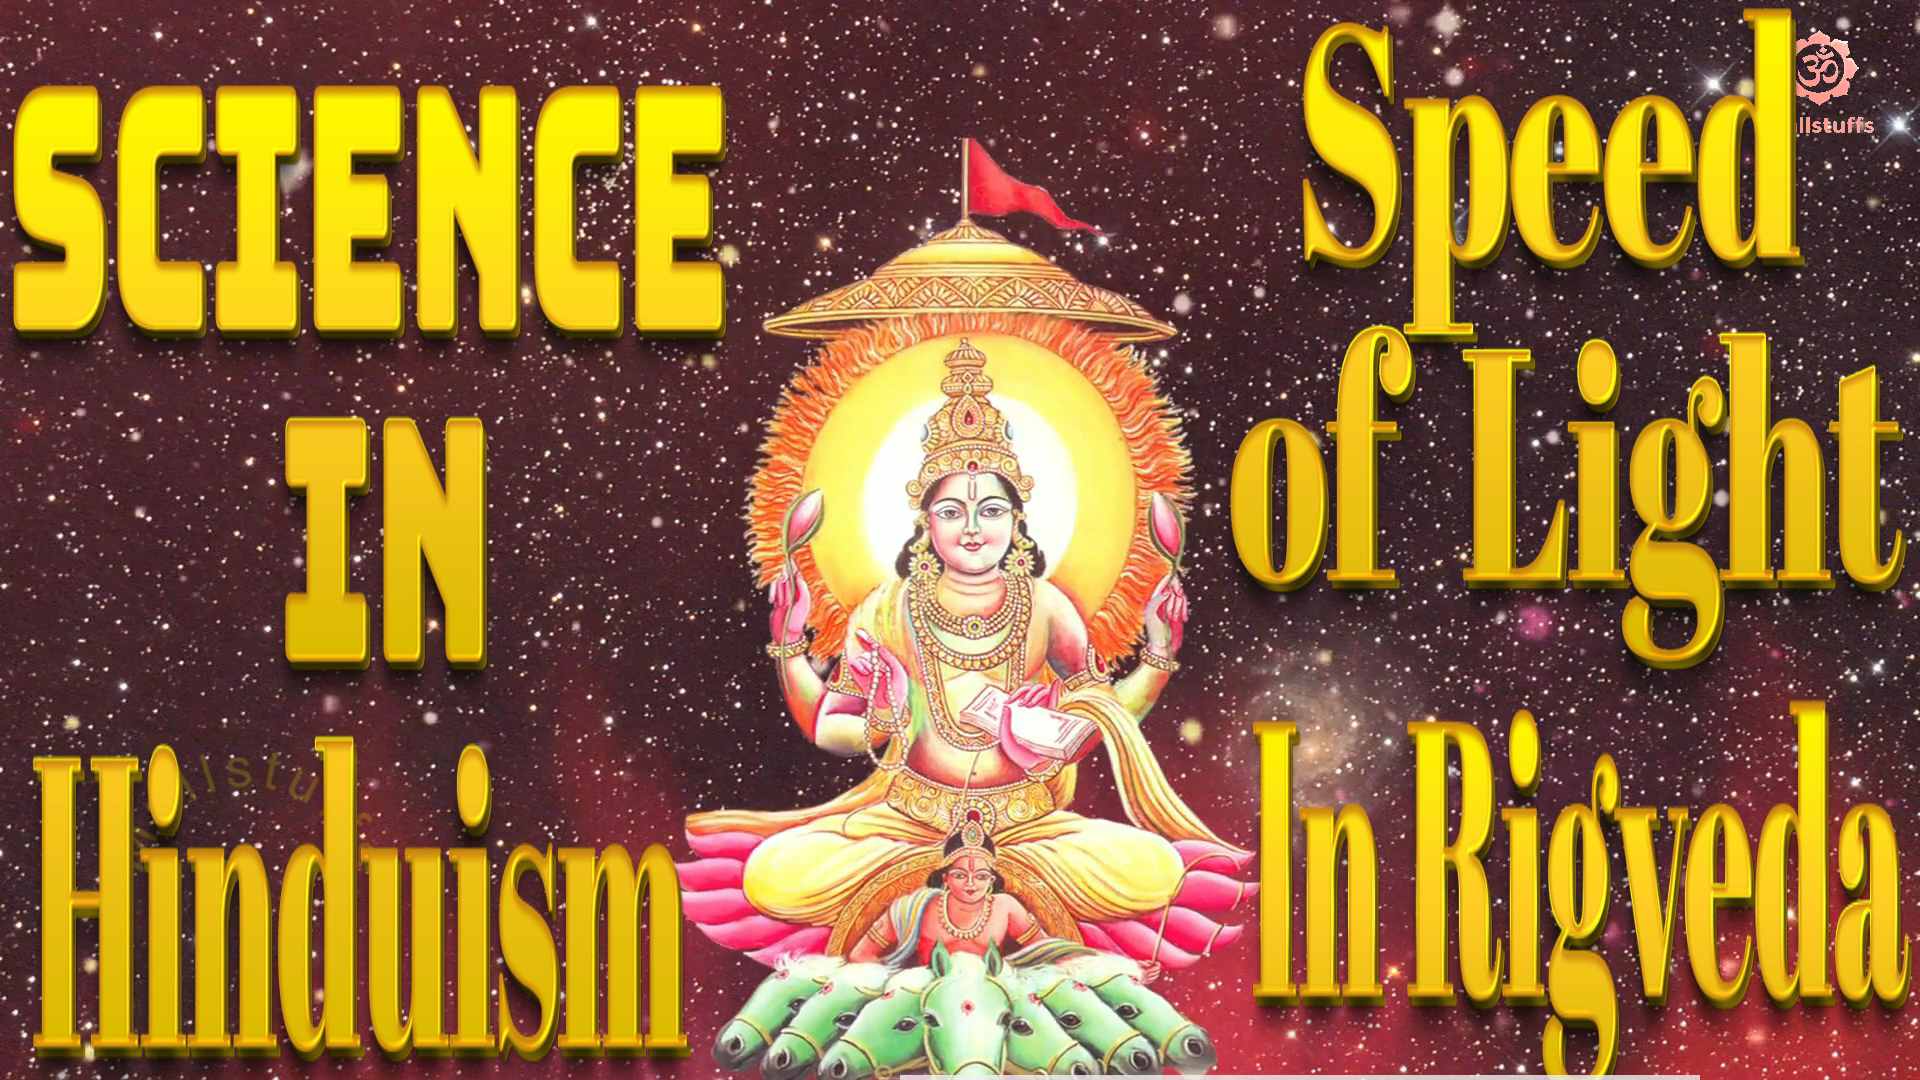 Science in Hinduism - Speed of light